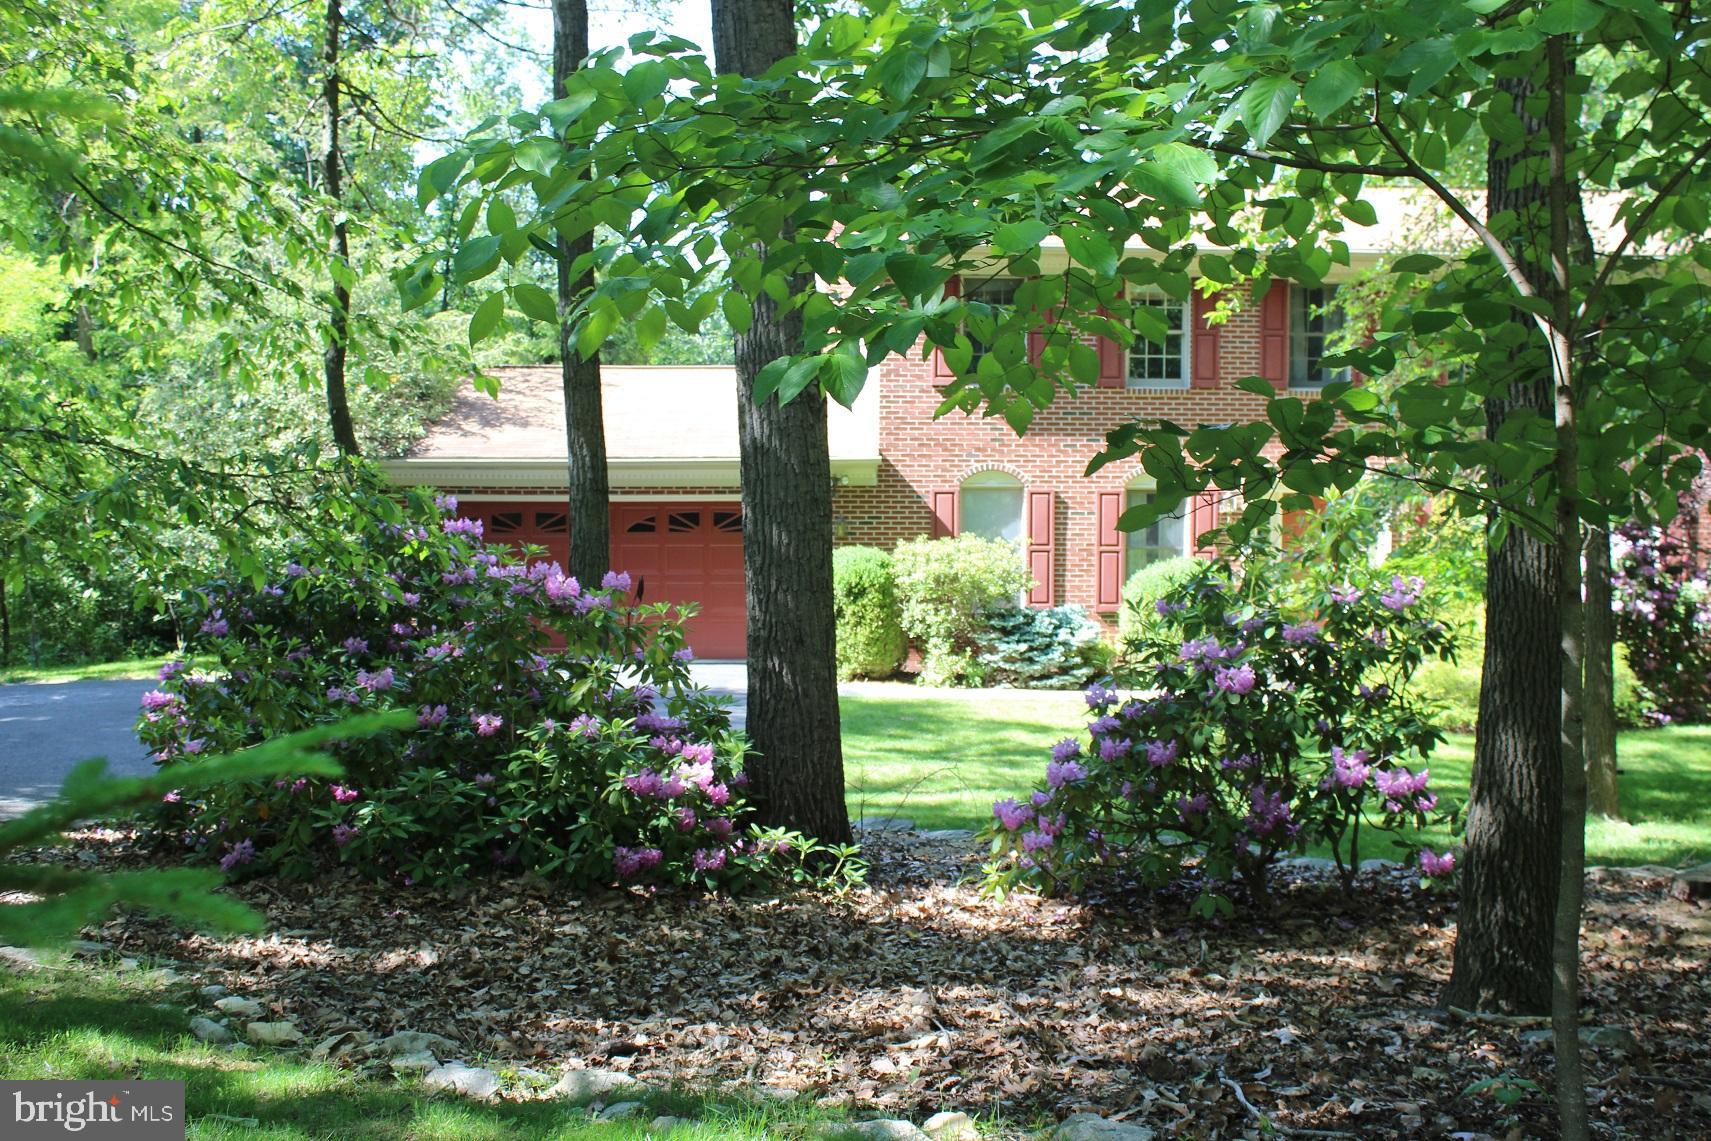 a view of a garden with plants